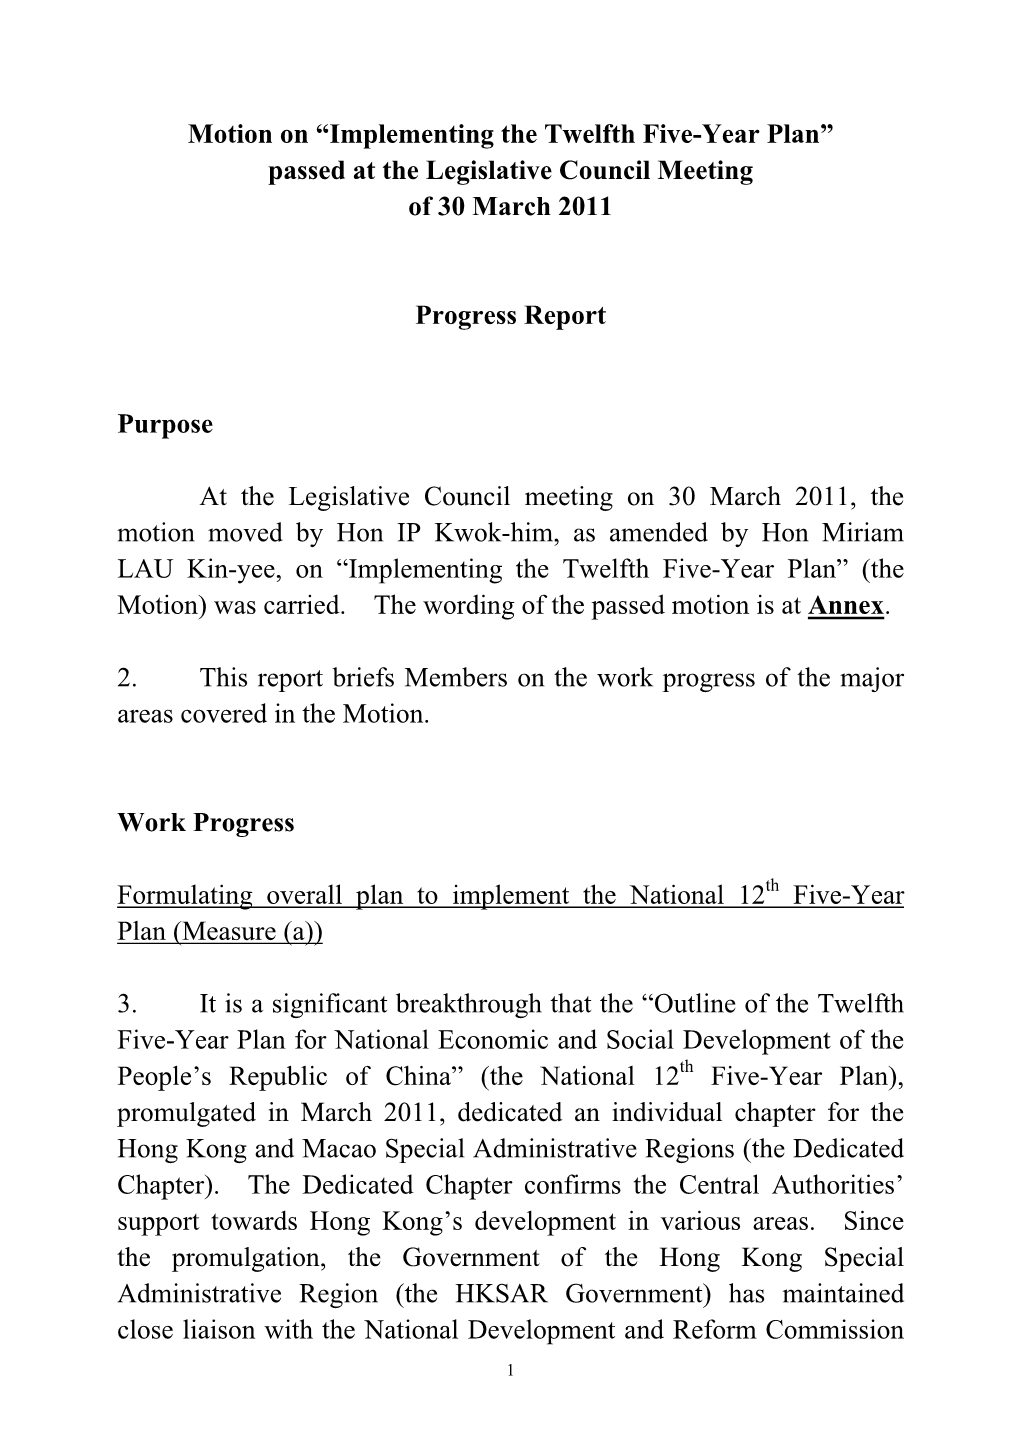 Motion on “Implementing the Twelfth Five-Year Plan” Passed at the Legislative Council Meeting of 30 March 2011